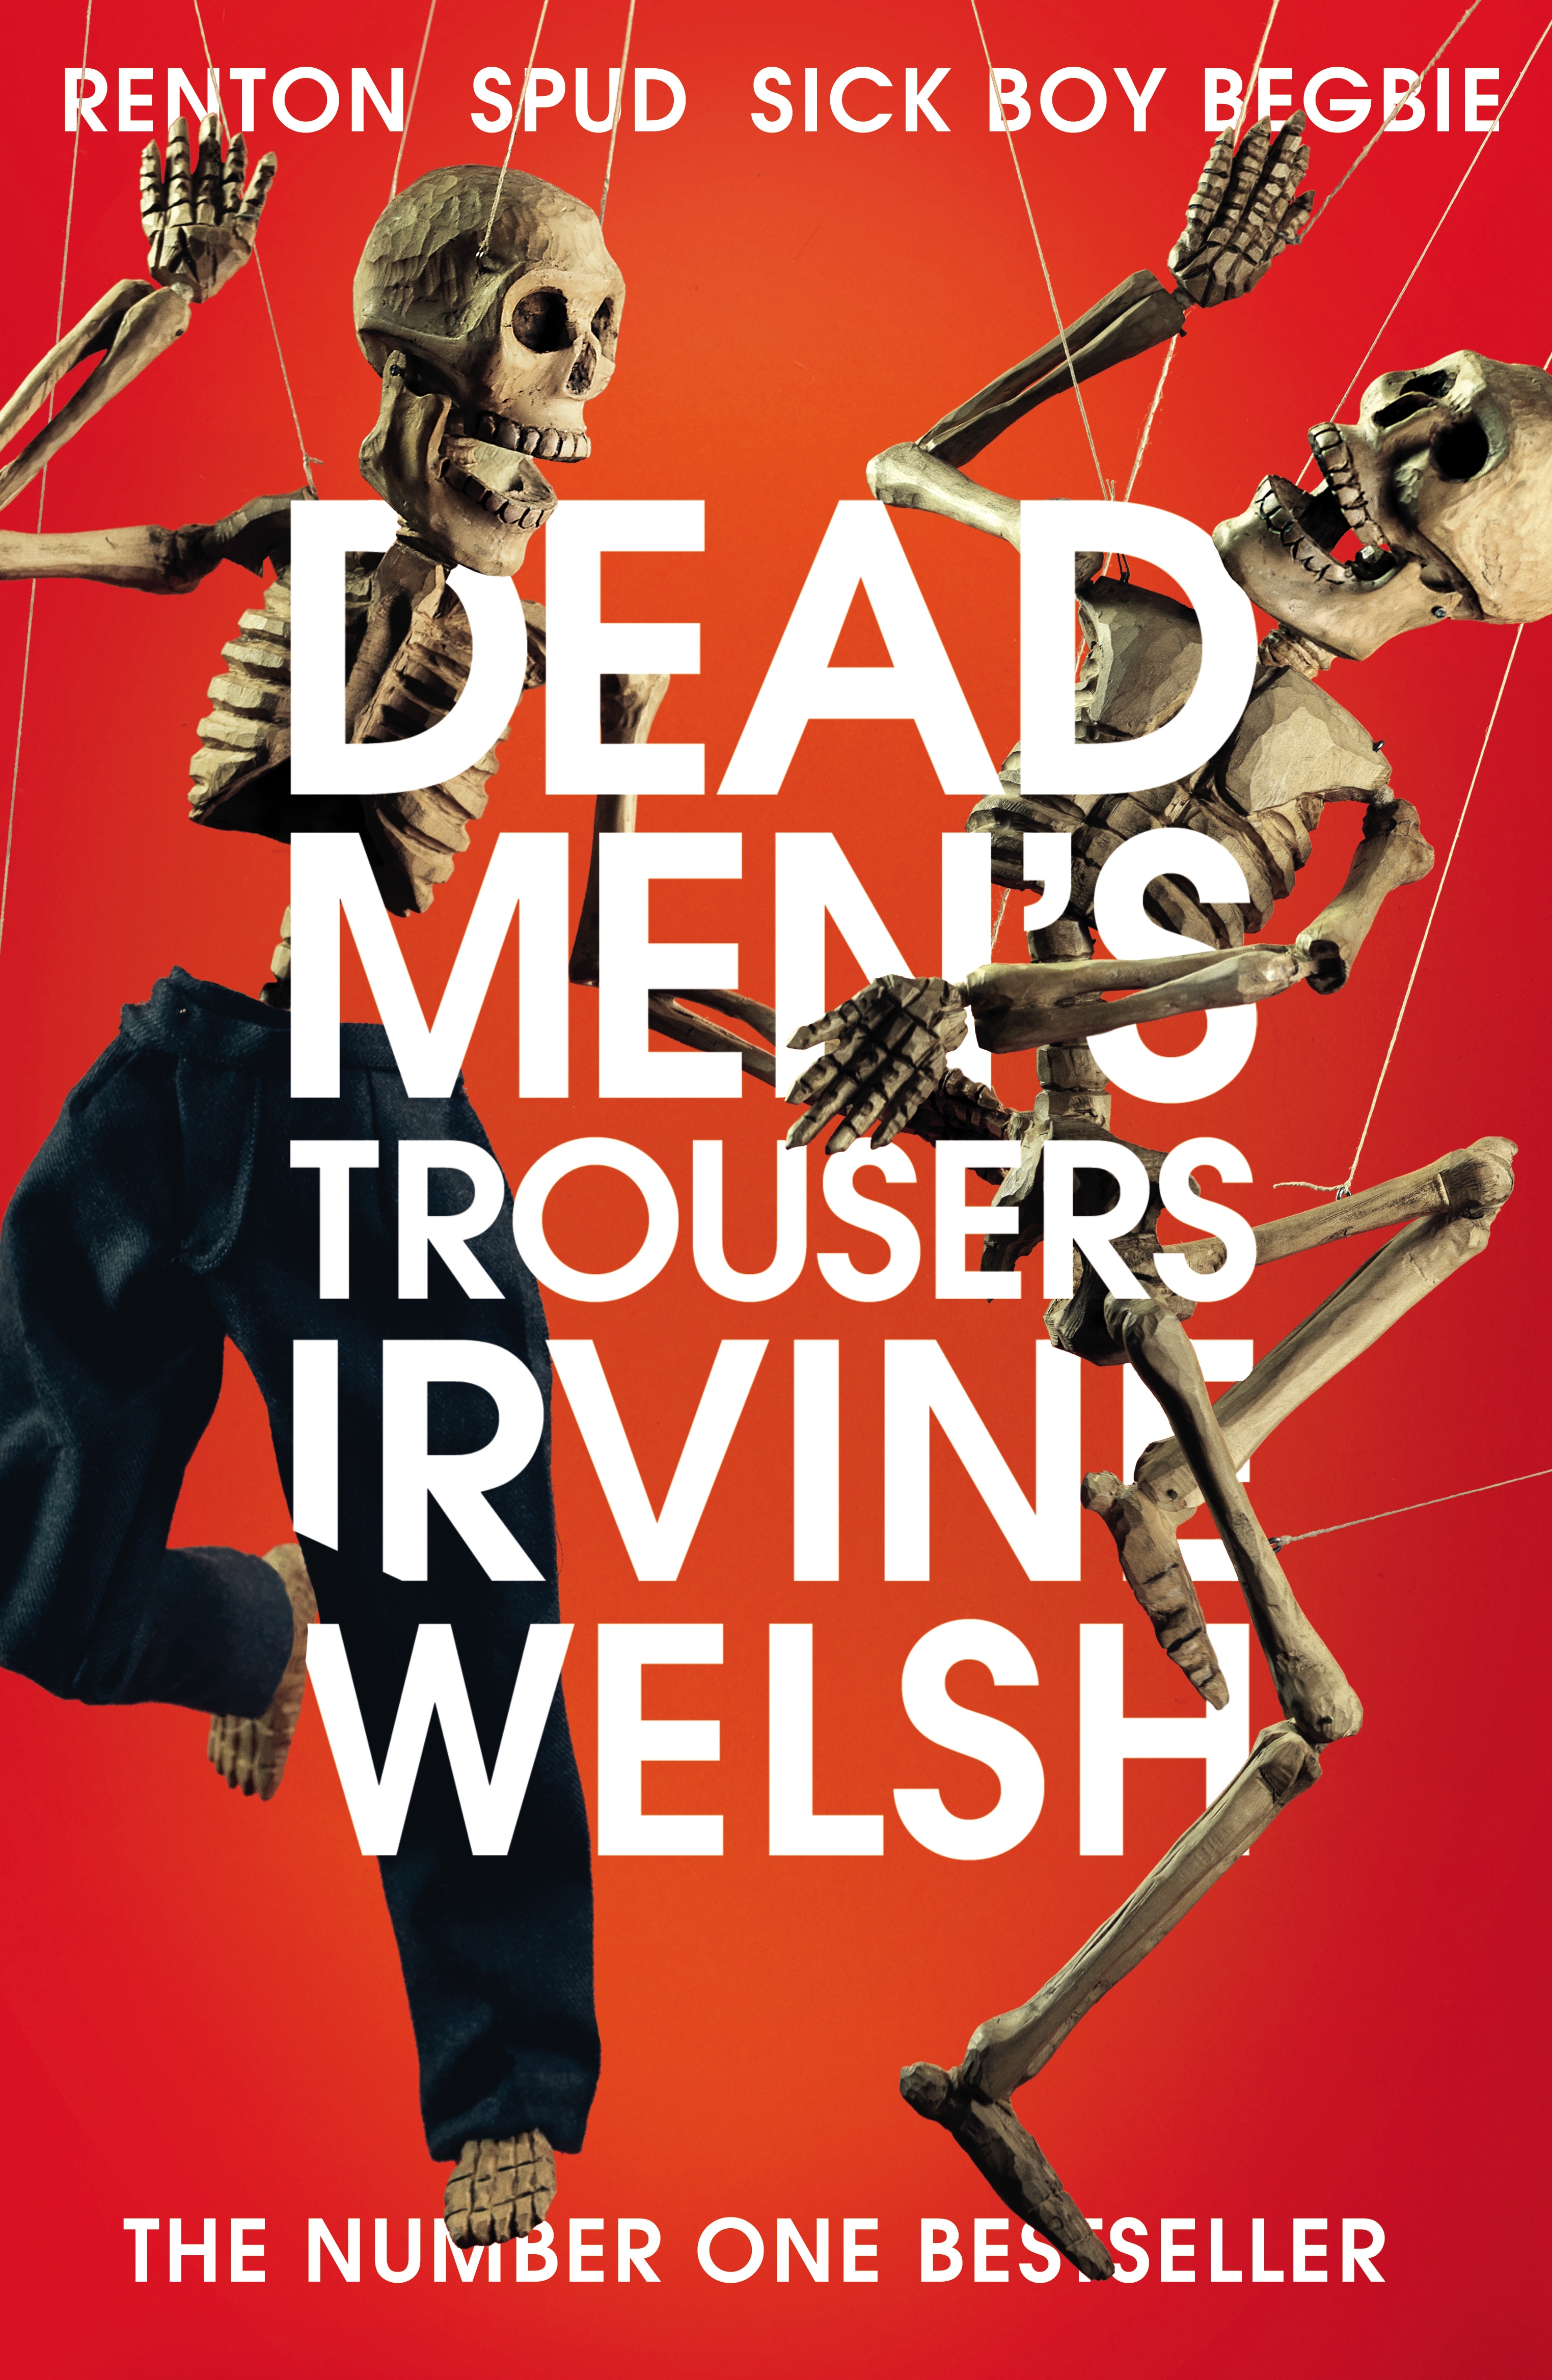 Book “Dead Men's Trousers” by Irvine Welsh — March 28, 2019